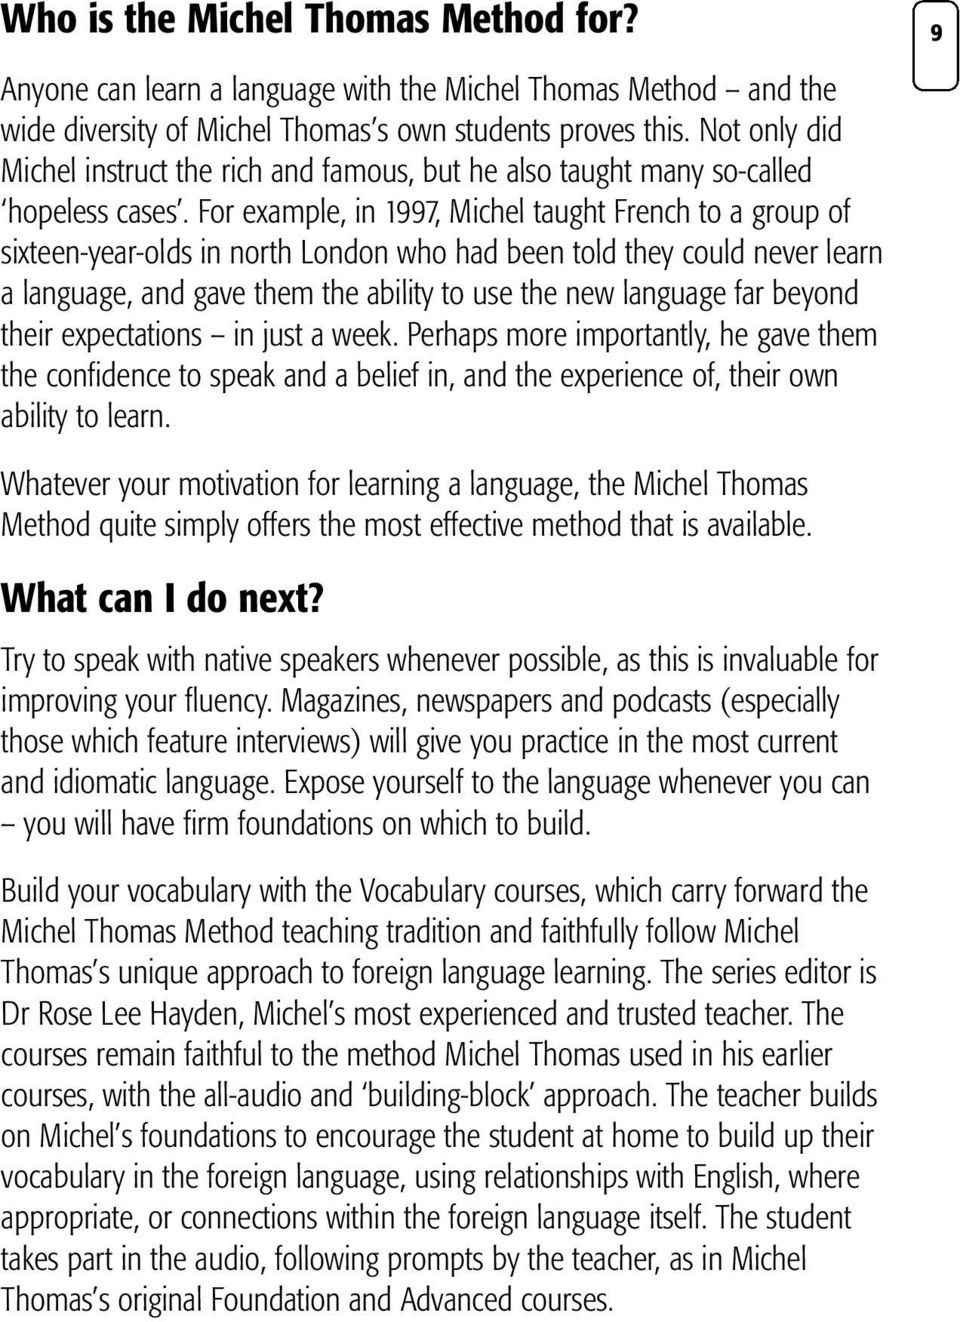 For example, in 1997, Michel taught French to a group of sixteen-year-olds in north London who had been told they could never learn a language, and gave them the ability to use the new language far